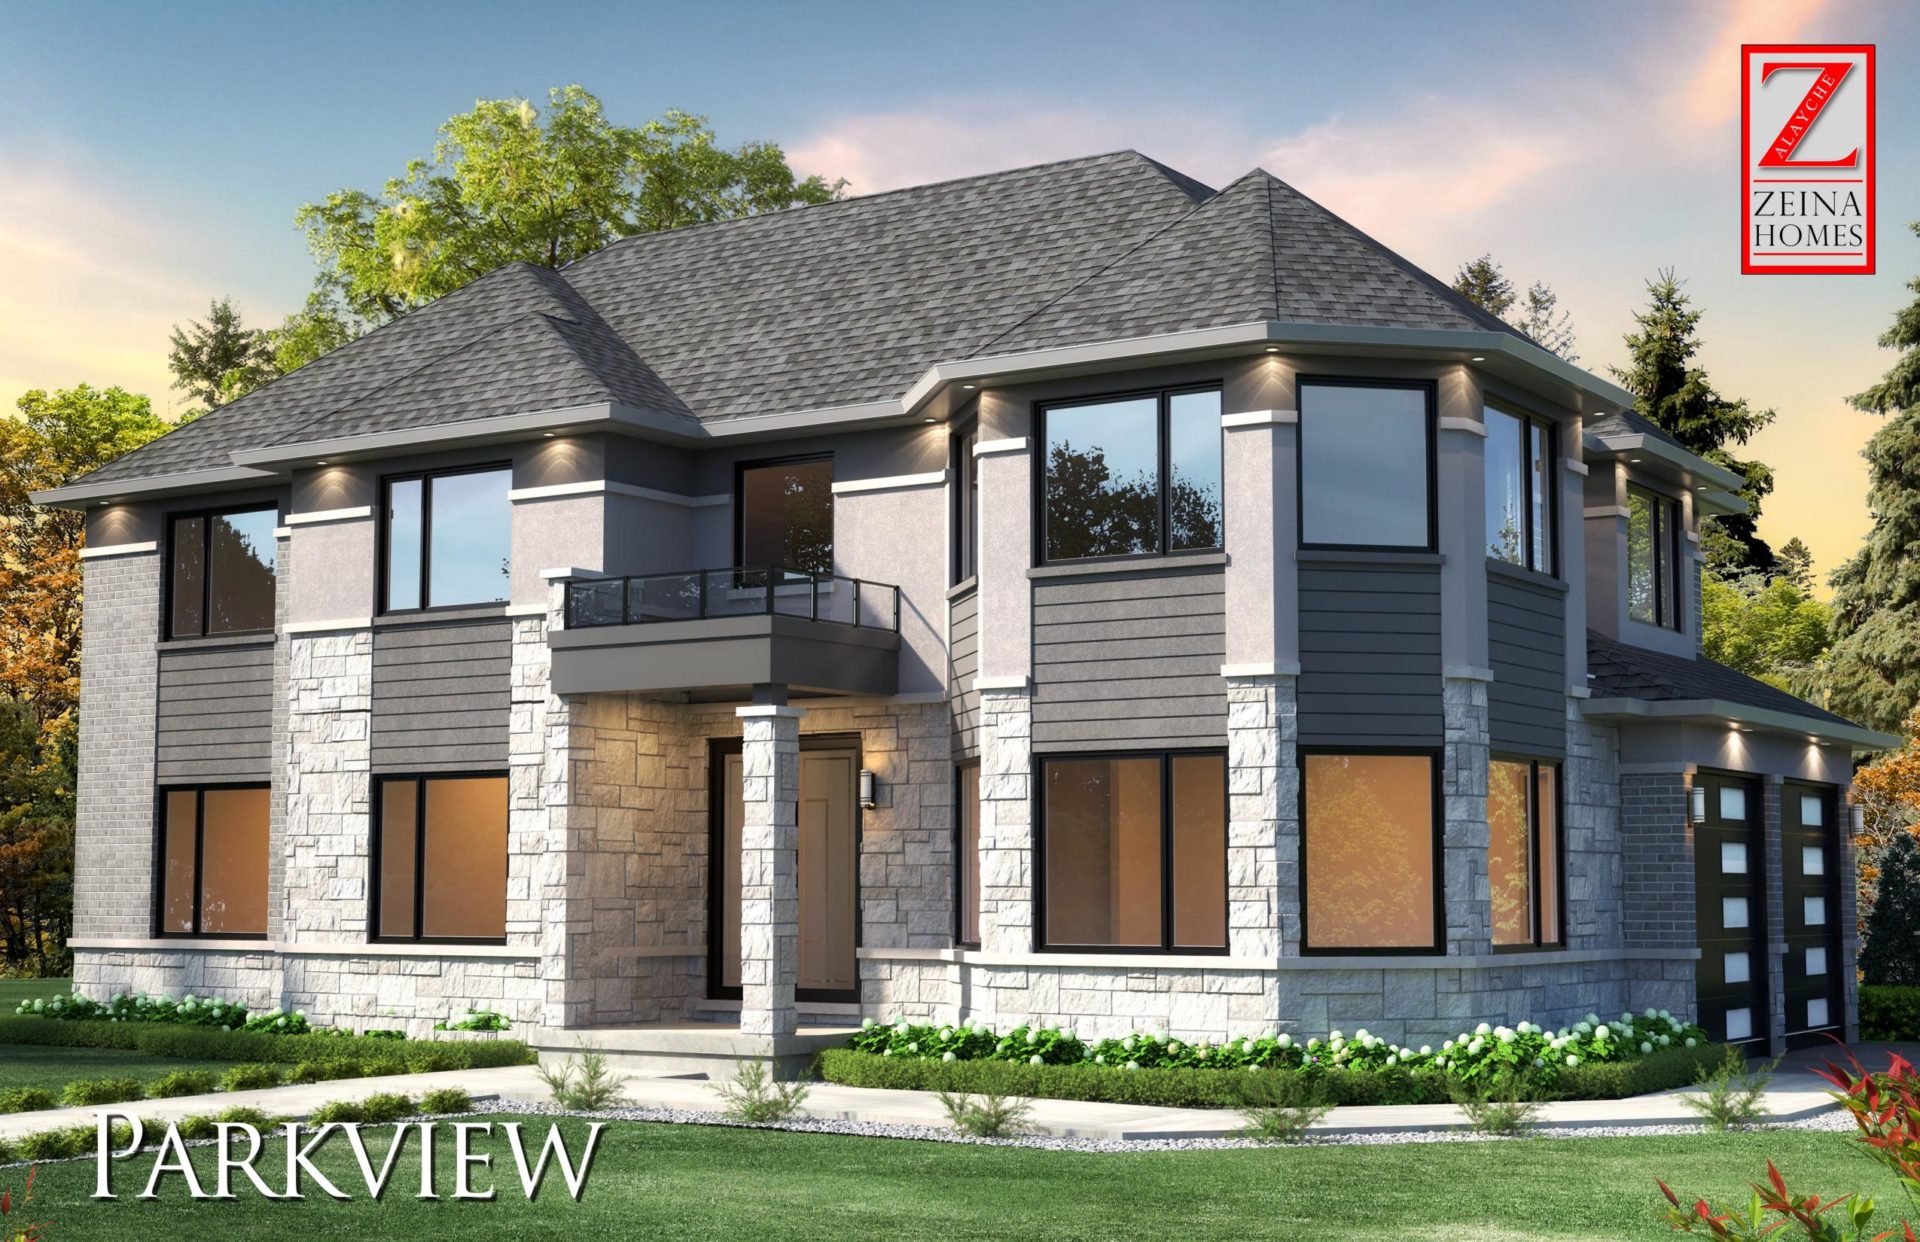 The Parkview home design